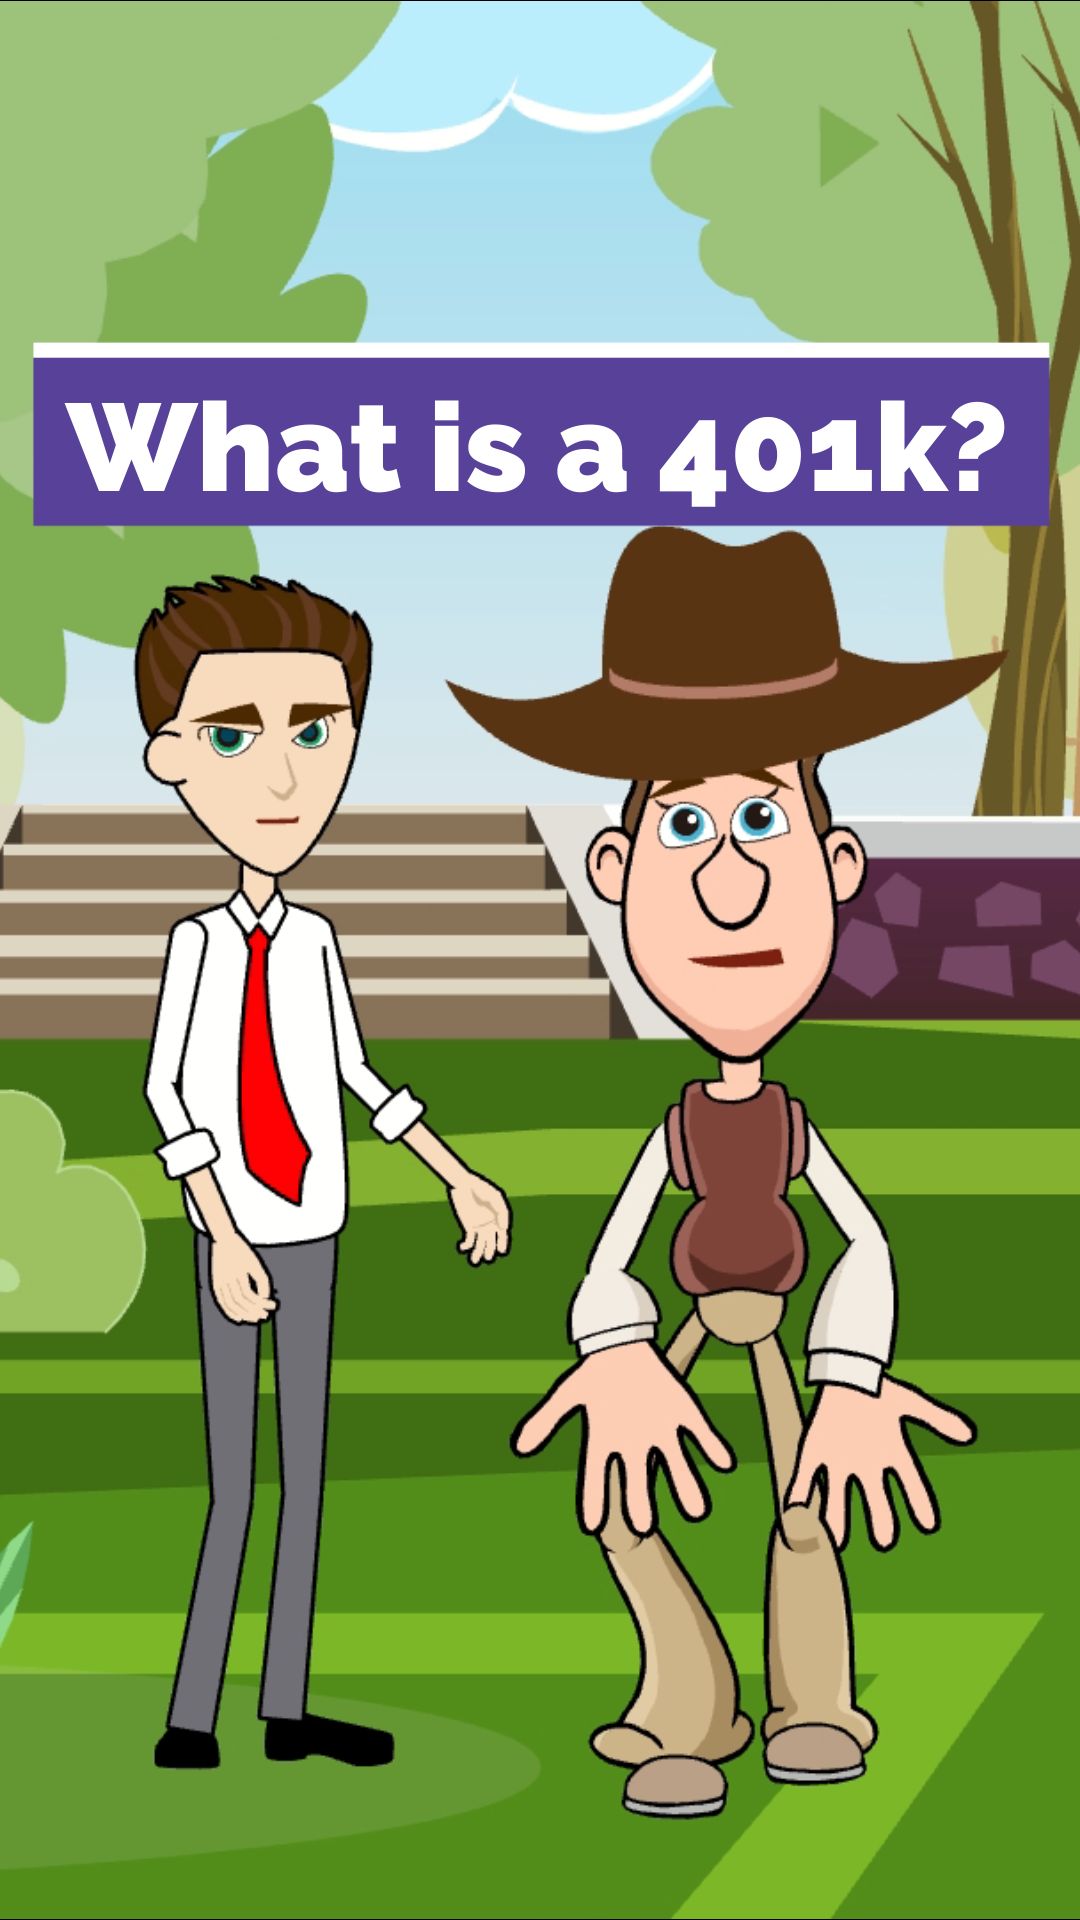 042 What is a 401k - Shorts